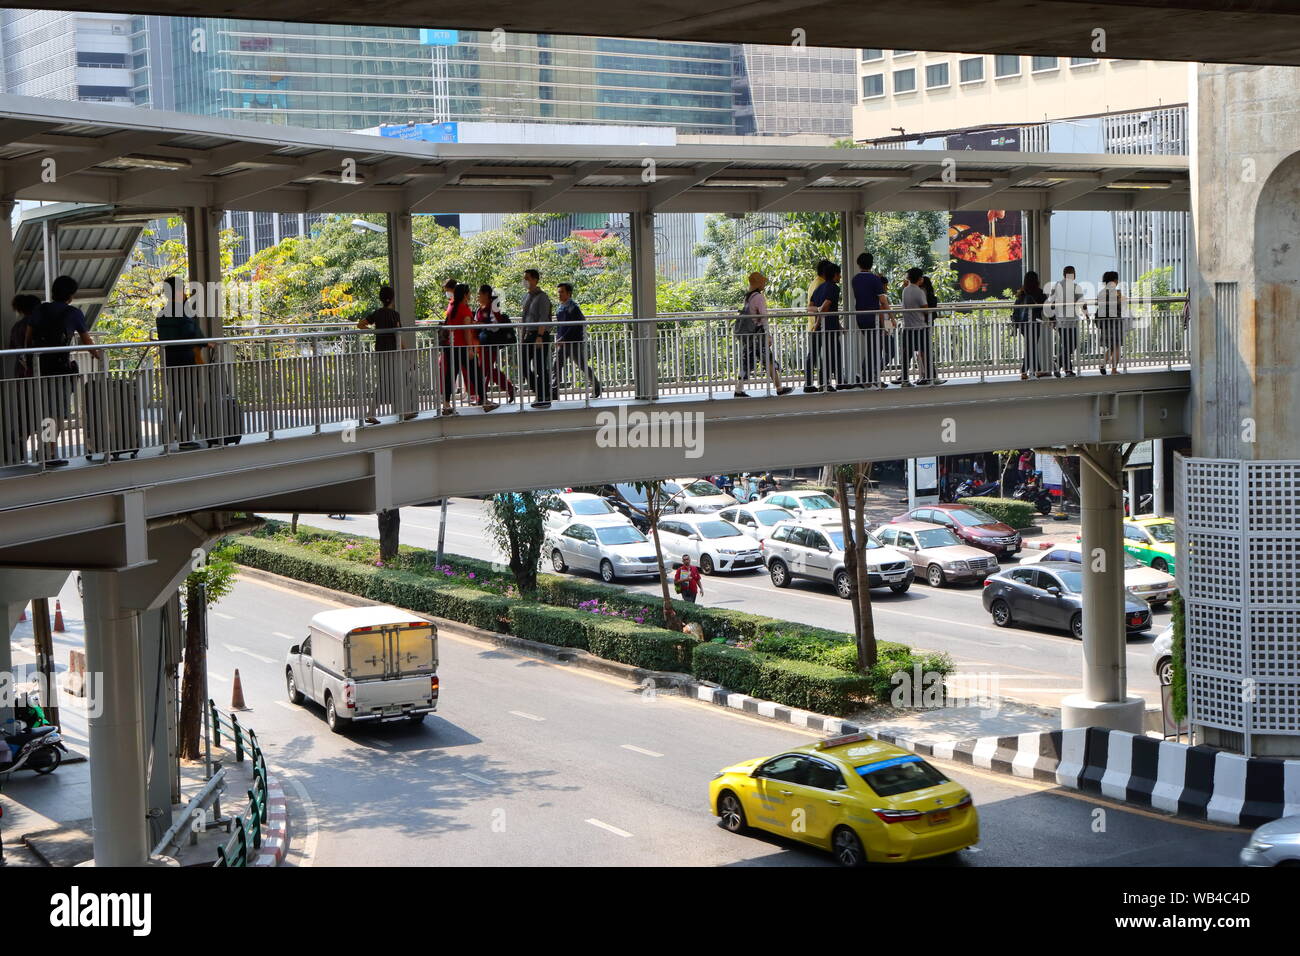 Group of people walking on elevated walkway at Siam Square area, famous shopping center of Bangkok, Thailand Stock Photo